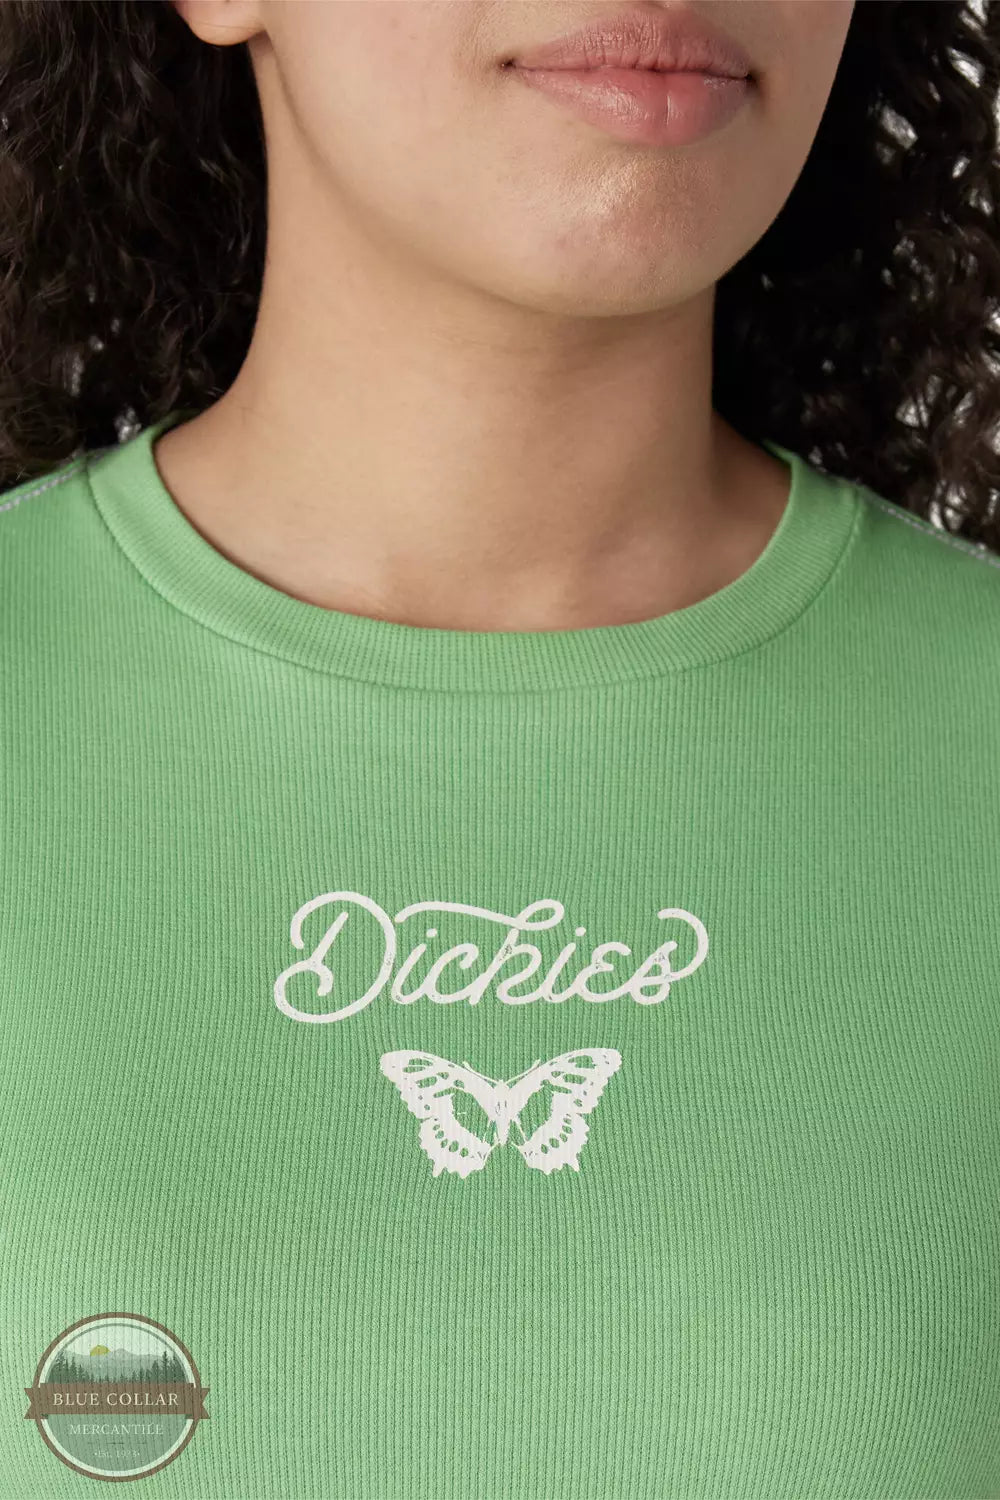 Dickies FSR64AR2 Butterfly Graphic Cropped Baby T-Shirt in Apple Mint Detail View